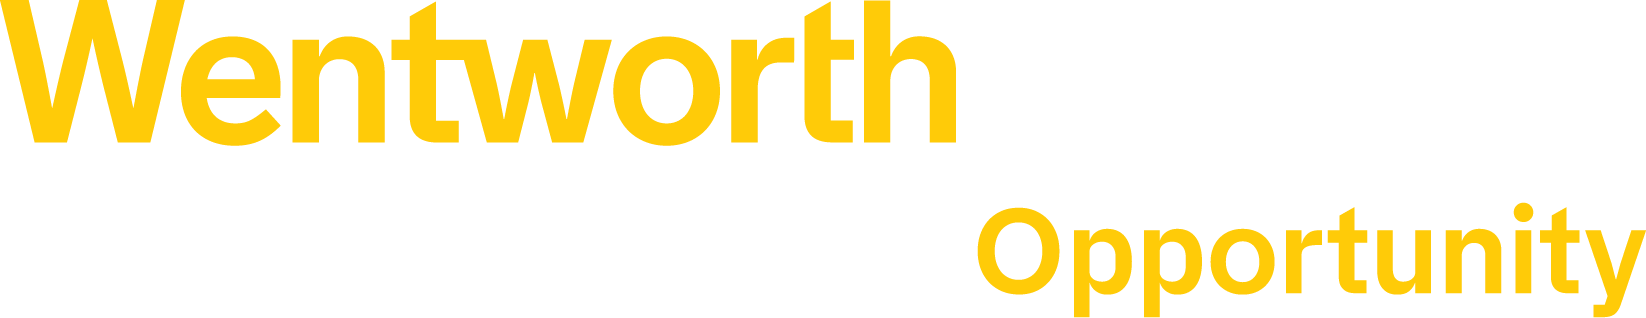 Wentworth - The University of Opportunity.